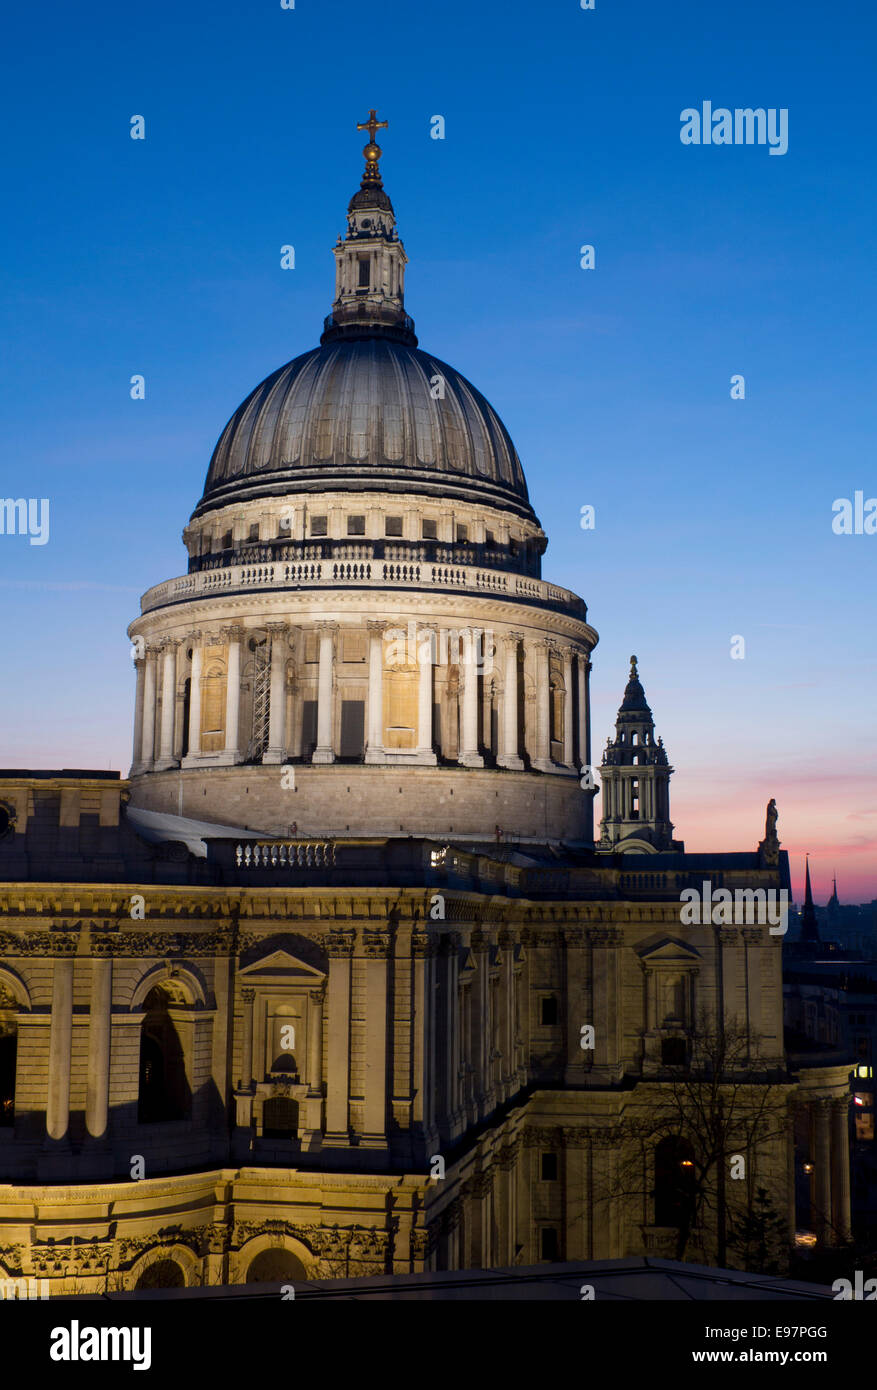 St Paul's Cathedral at dusk twilight night from One New Change rooftop City of London England UK Stock Photo